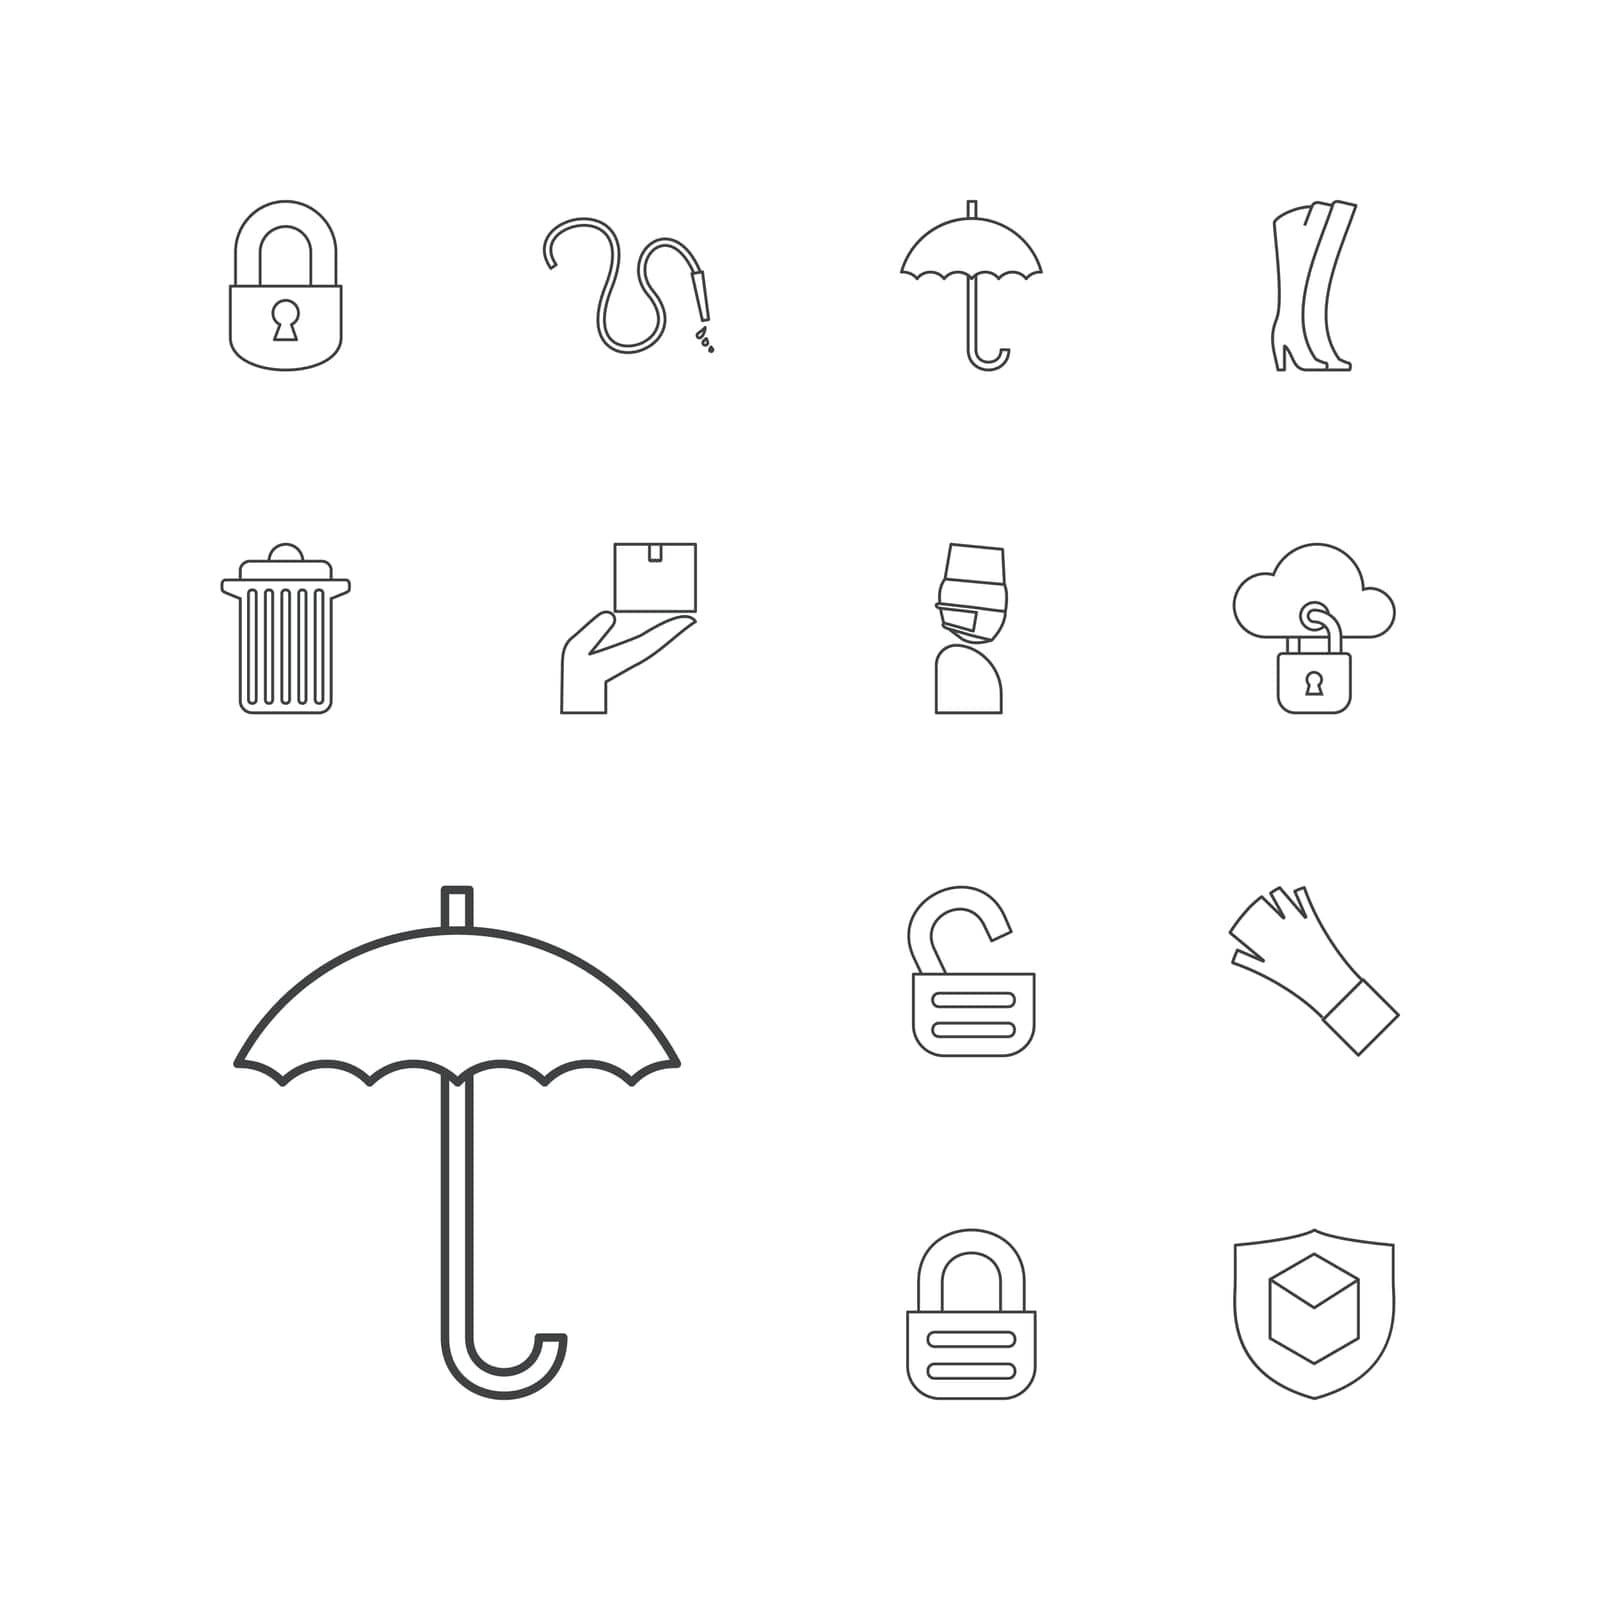 insurance,symbol,medical,woman,bin,icon,sign,isolated,protection,secure,delete,cloud,security,gloves,white,web,flat,safety,design,boots,lock,vector,cargo,element,mask,set,business,umbrella,hose,dry,opened,water,trash,background,keep,illustration,internet,object